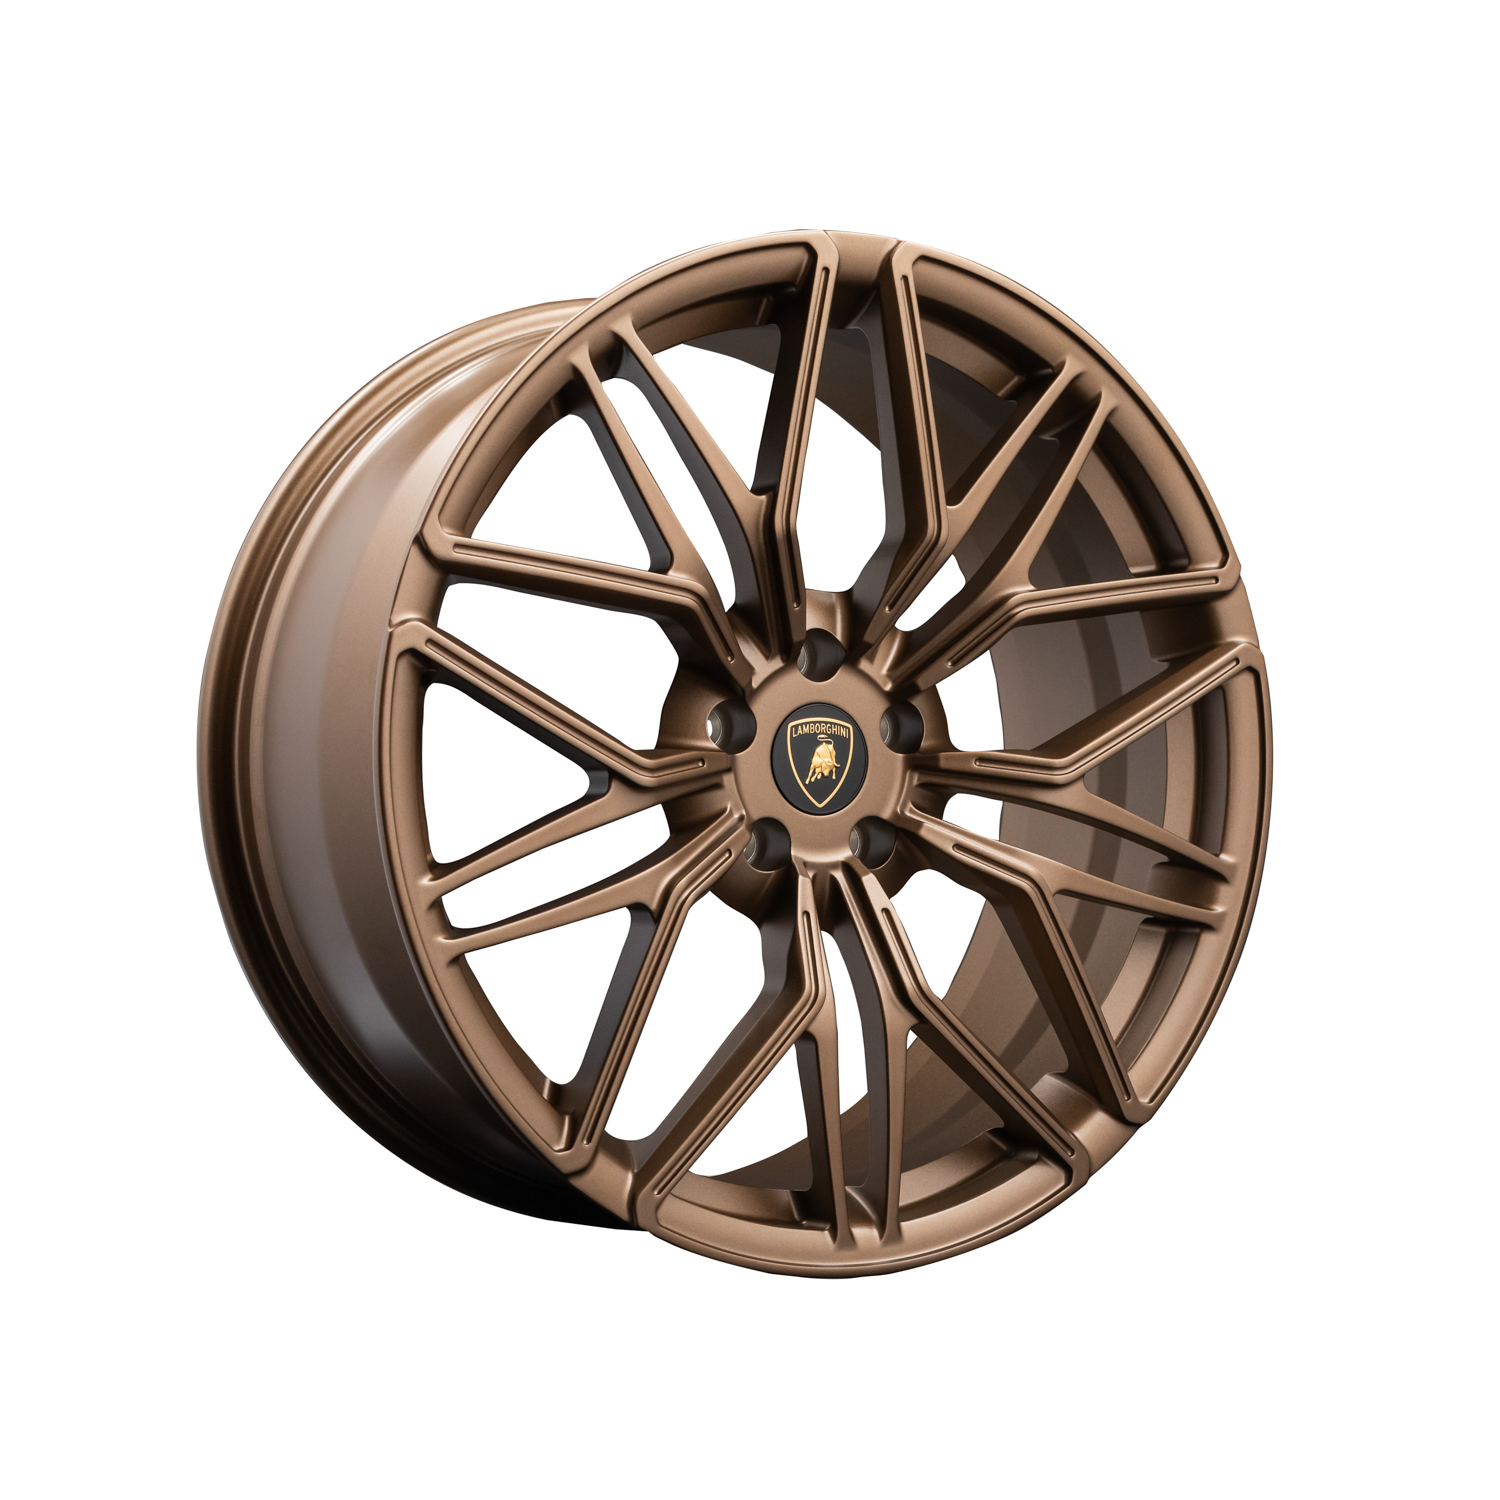 byron-mason-photography_commercial-product_iconisus-wheels-003-1500px